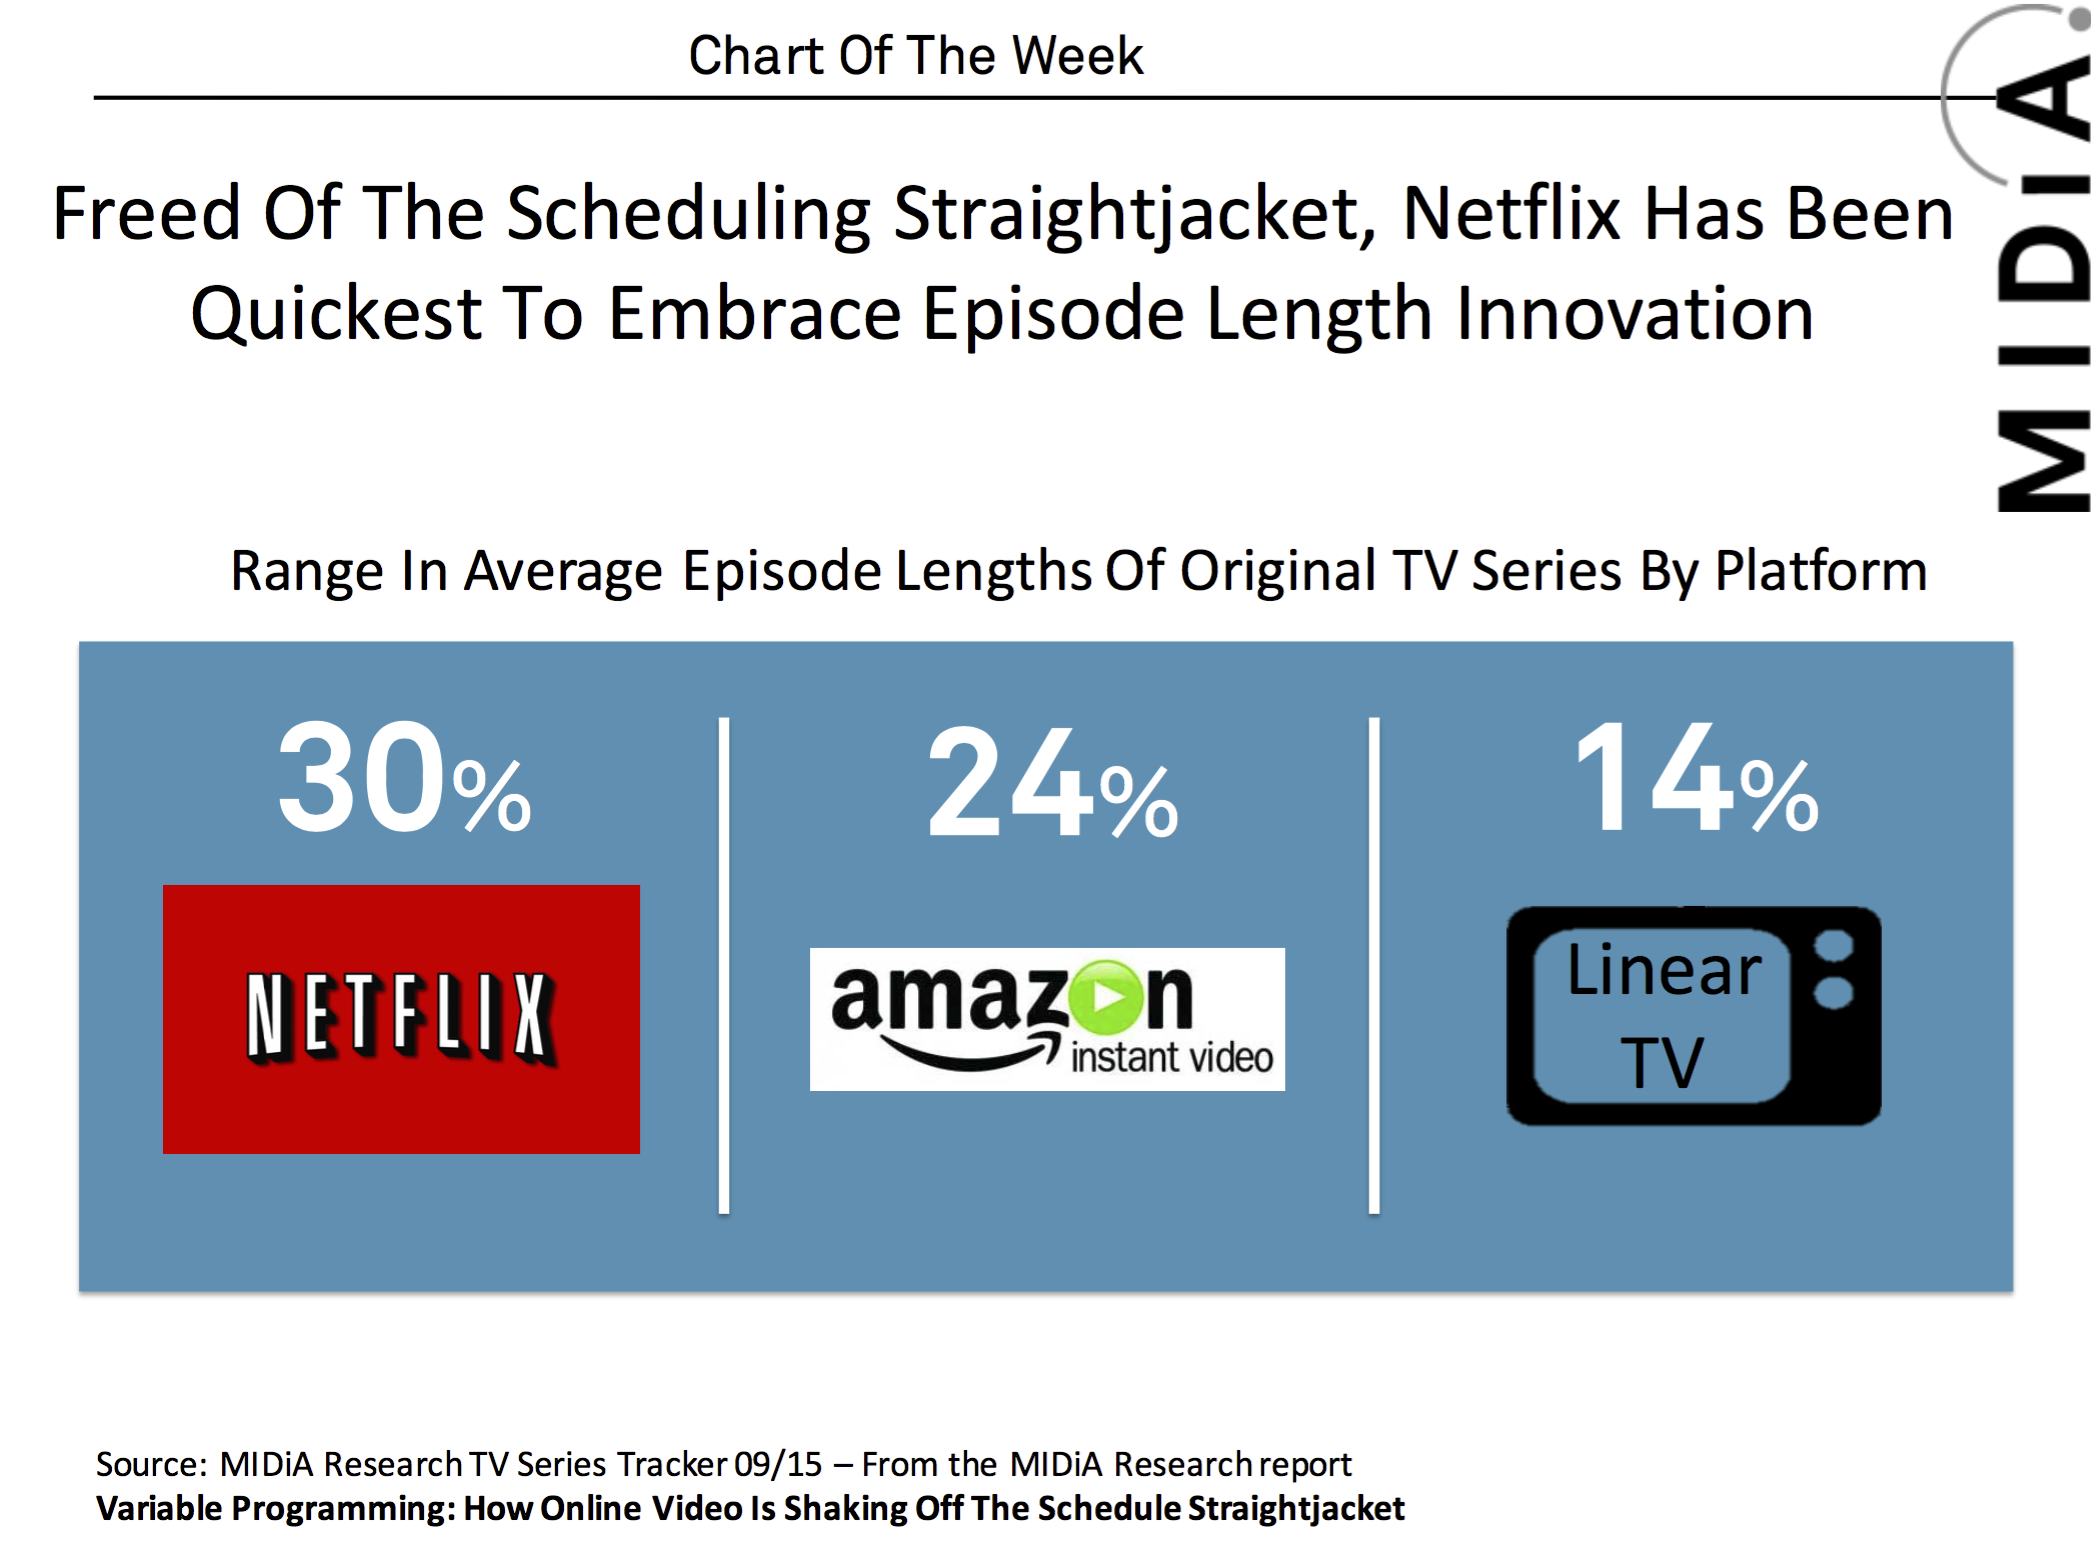 Cover image for MIDiA Chart Of The Week: Netflix Leads Format Innovation